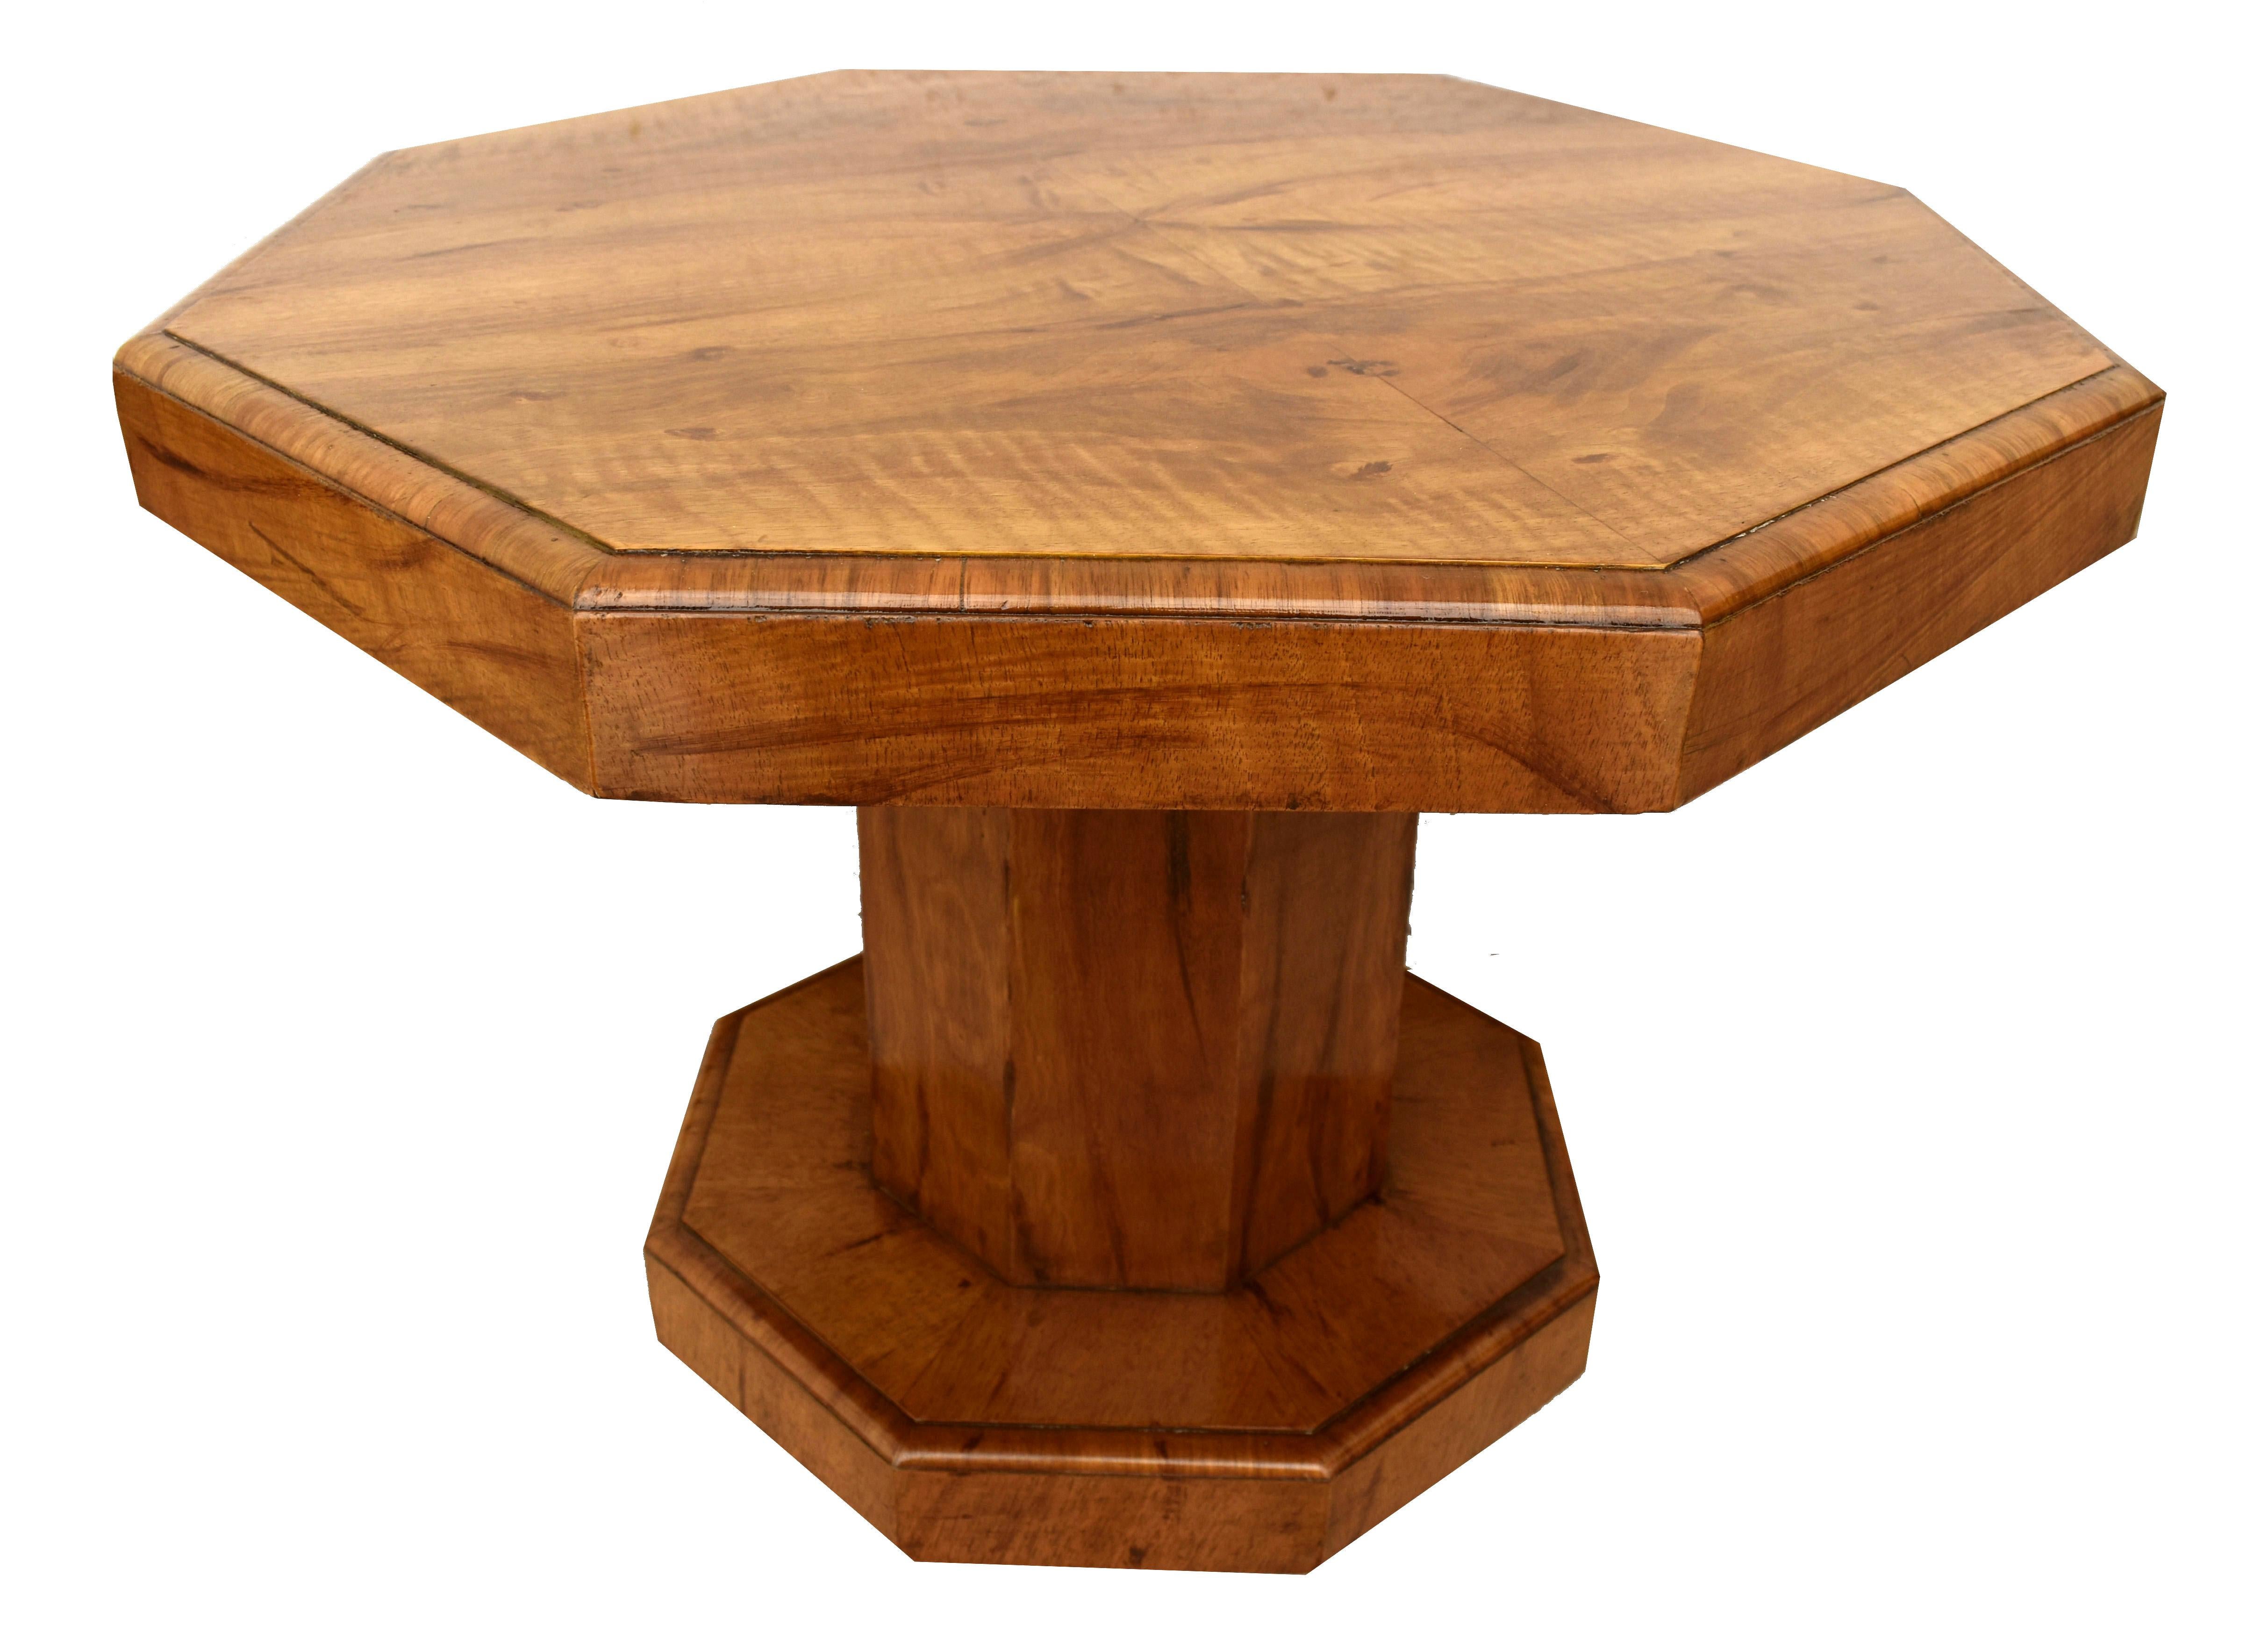 20th Century Art Deco Walnut Occasional Table, English, c1930 For Sale